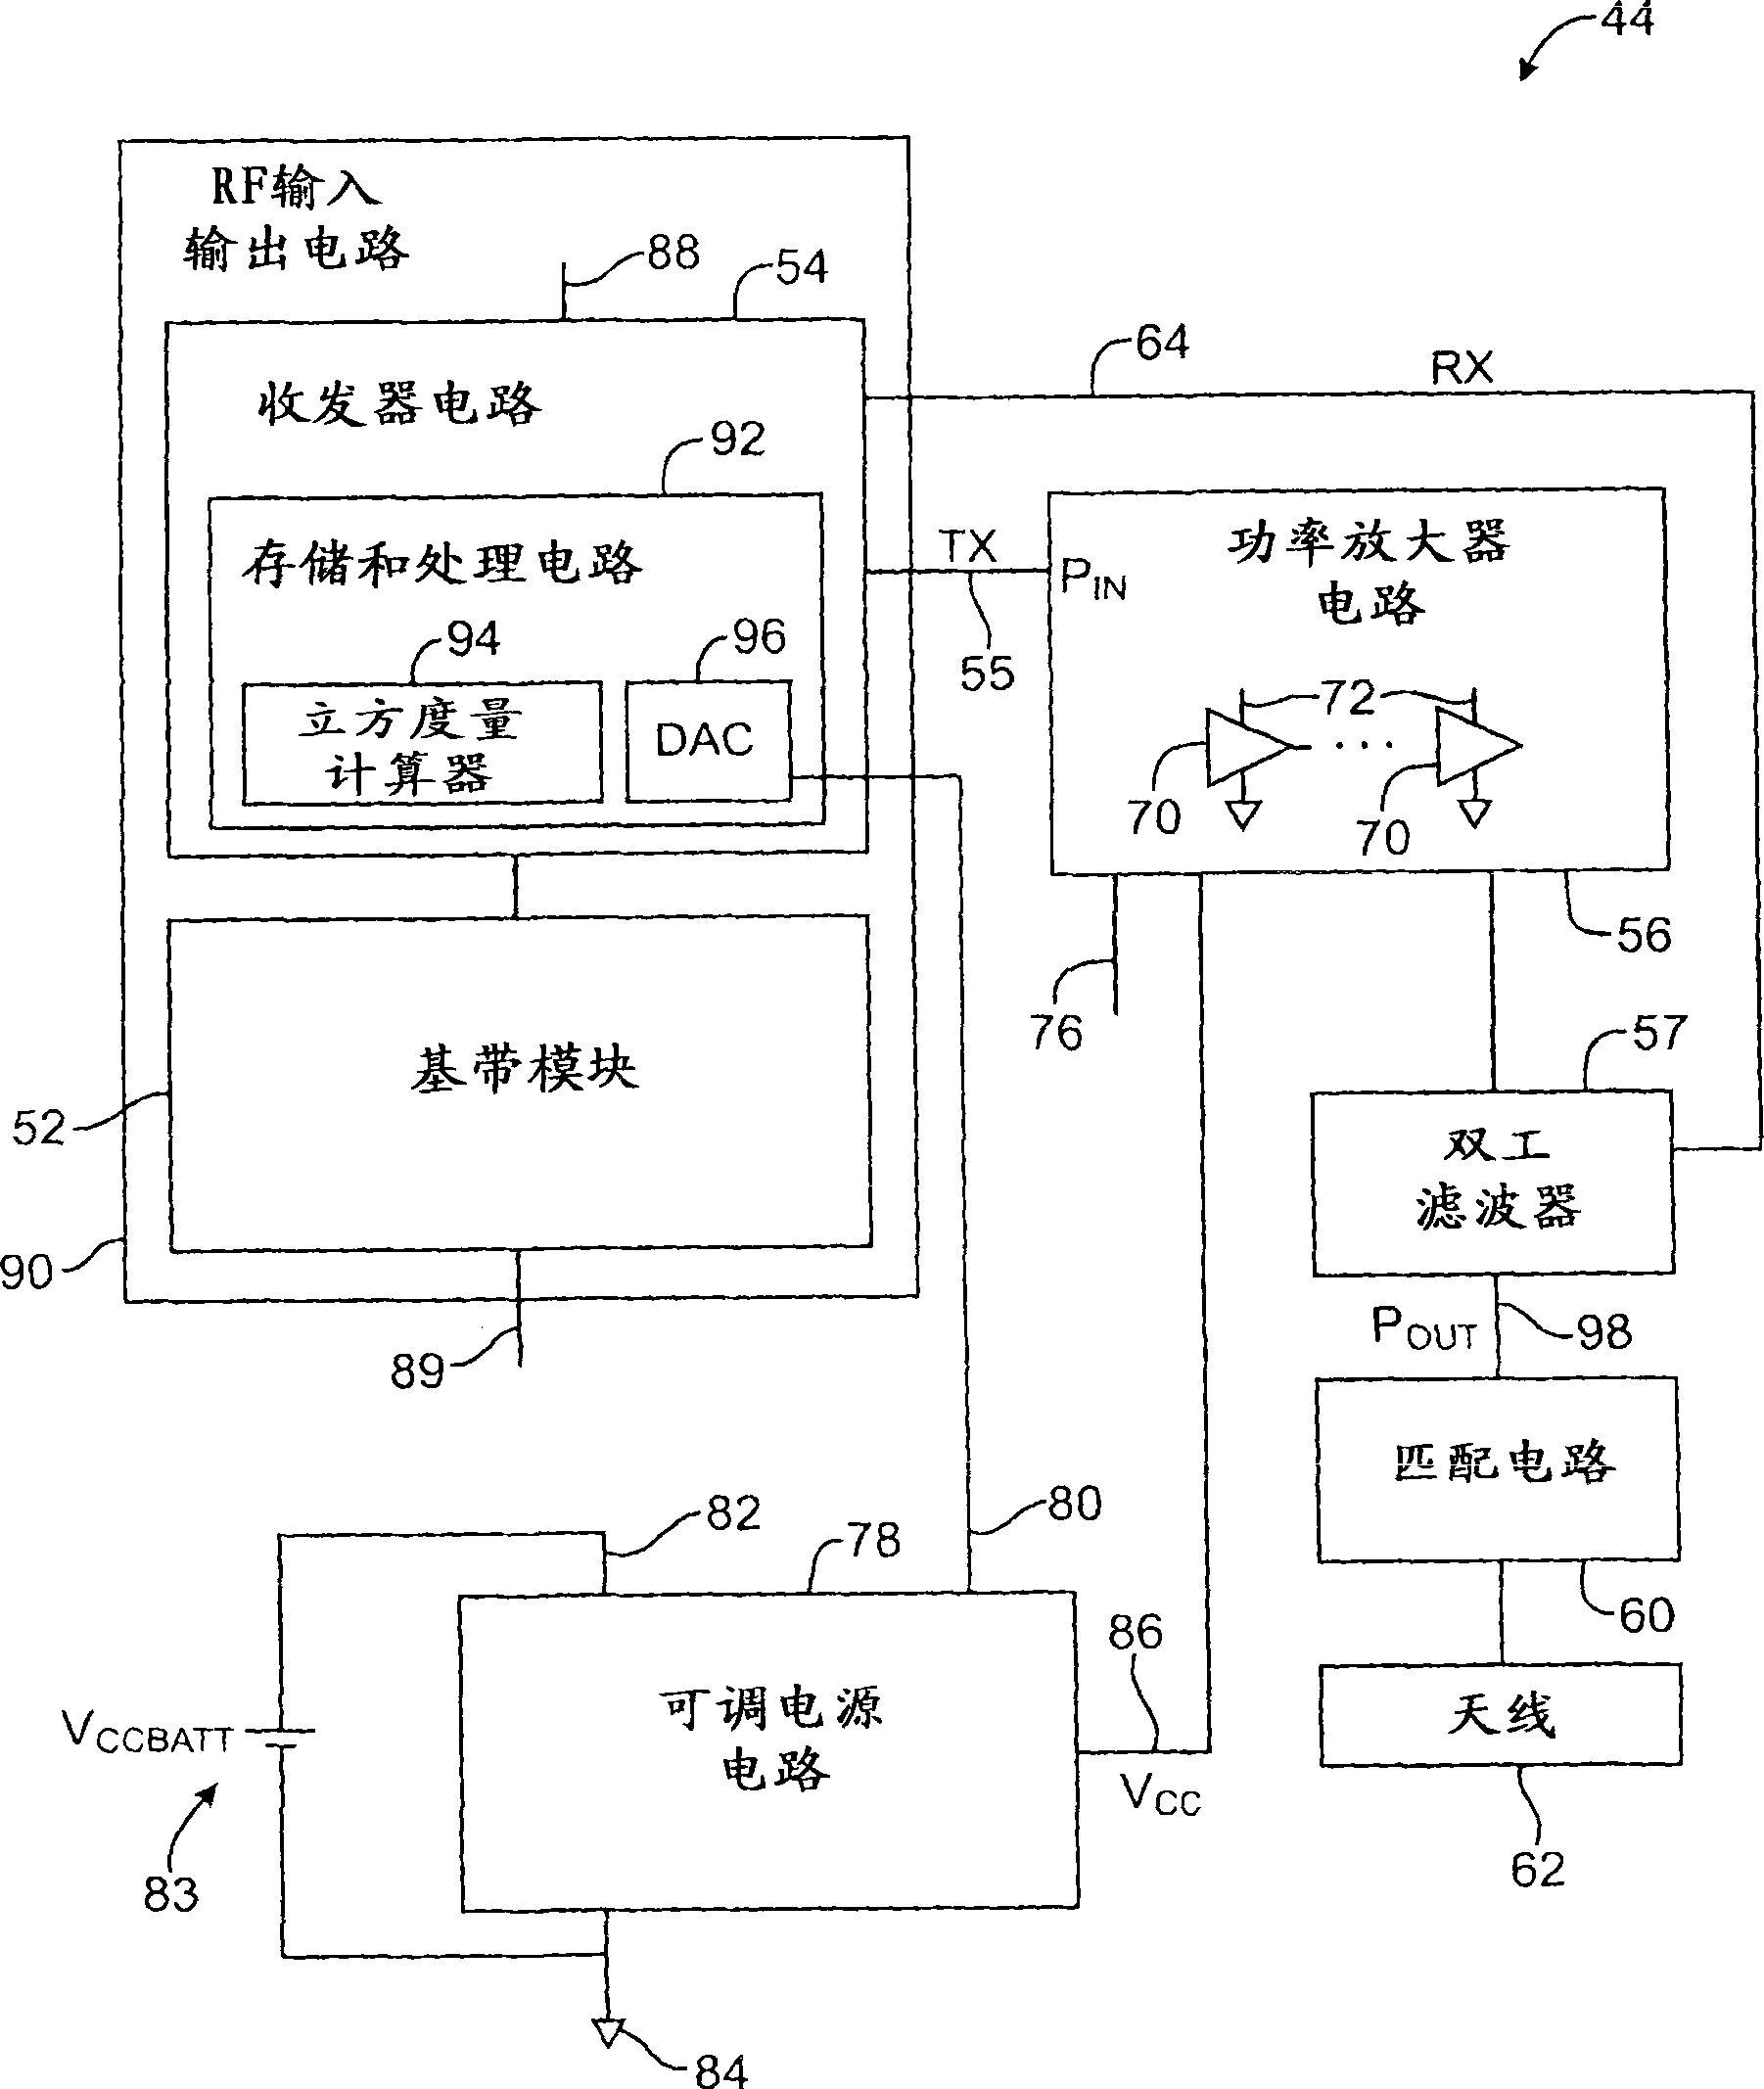 Electronic device with data-rate-dependent power amplifier bias